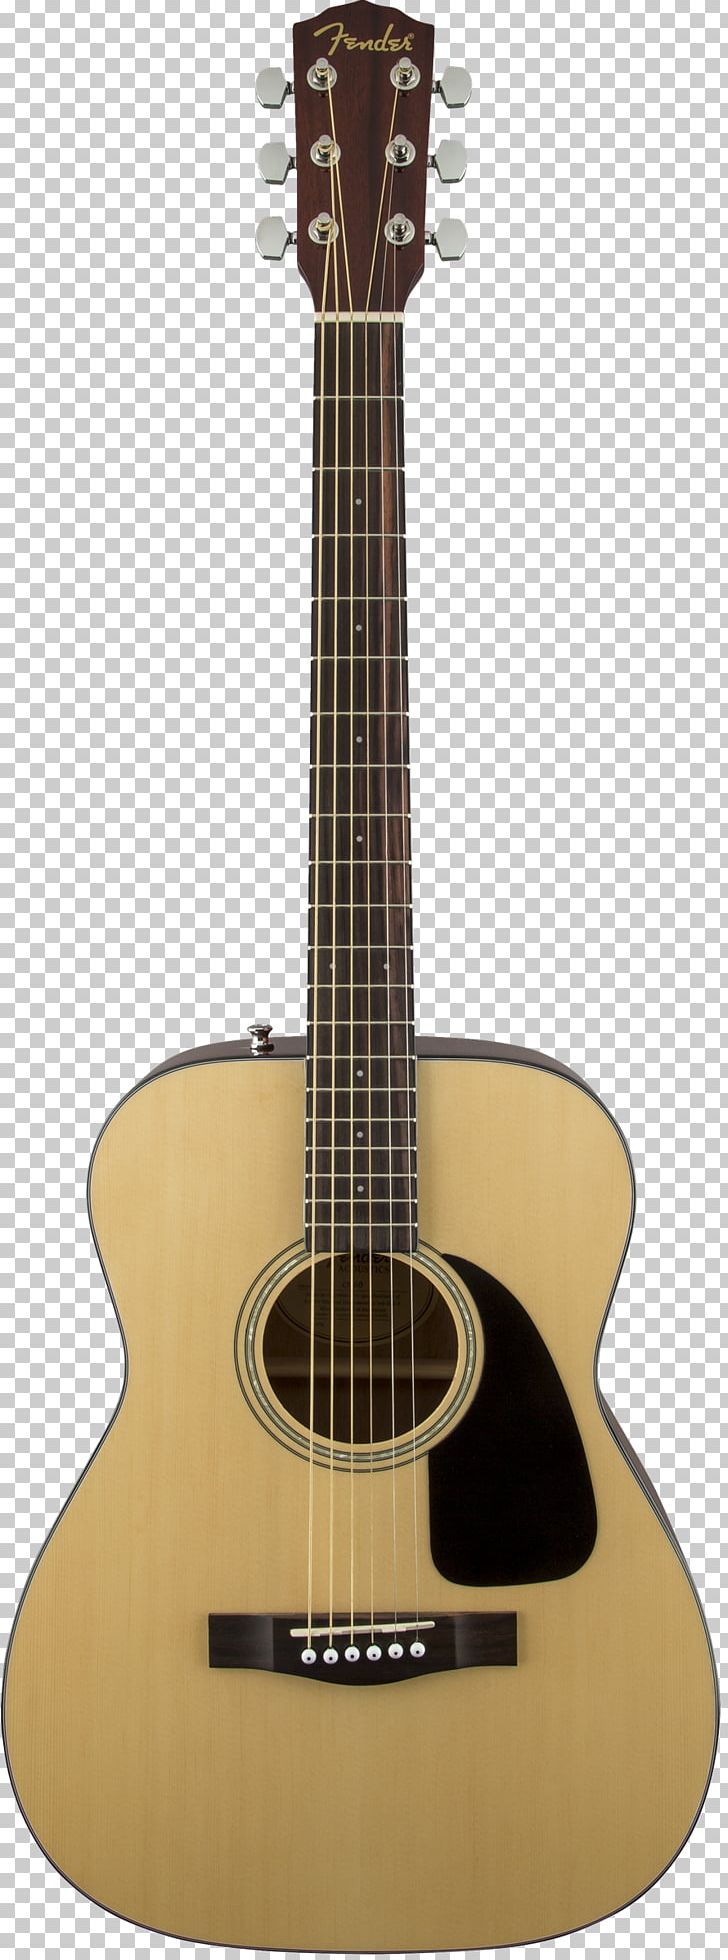 Steel-string Acoustic Guitar Musical Instruments PNG, Clipart, Acoustic Bass Guitar, Classical Guitar, Cuatro, Cutaway, Guitar Free PNG Download